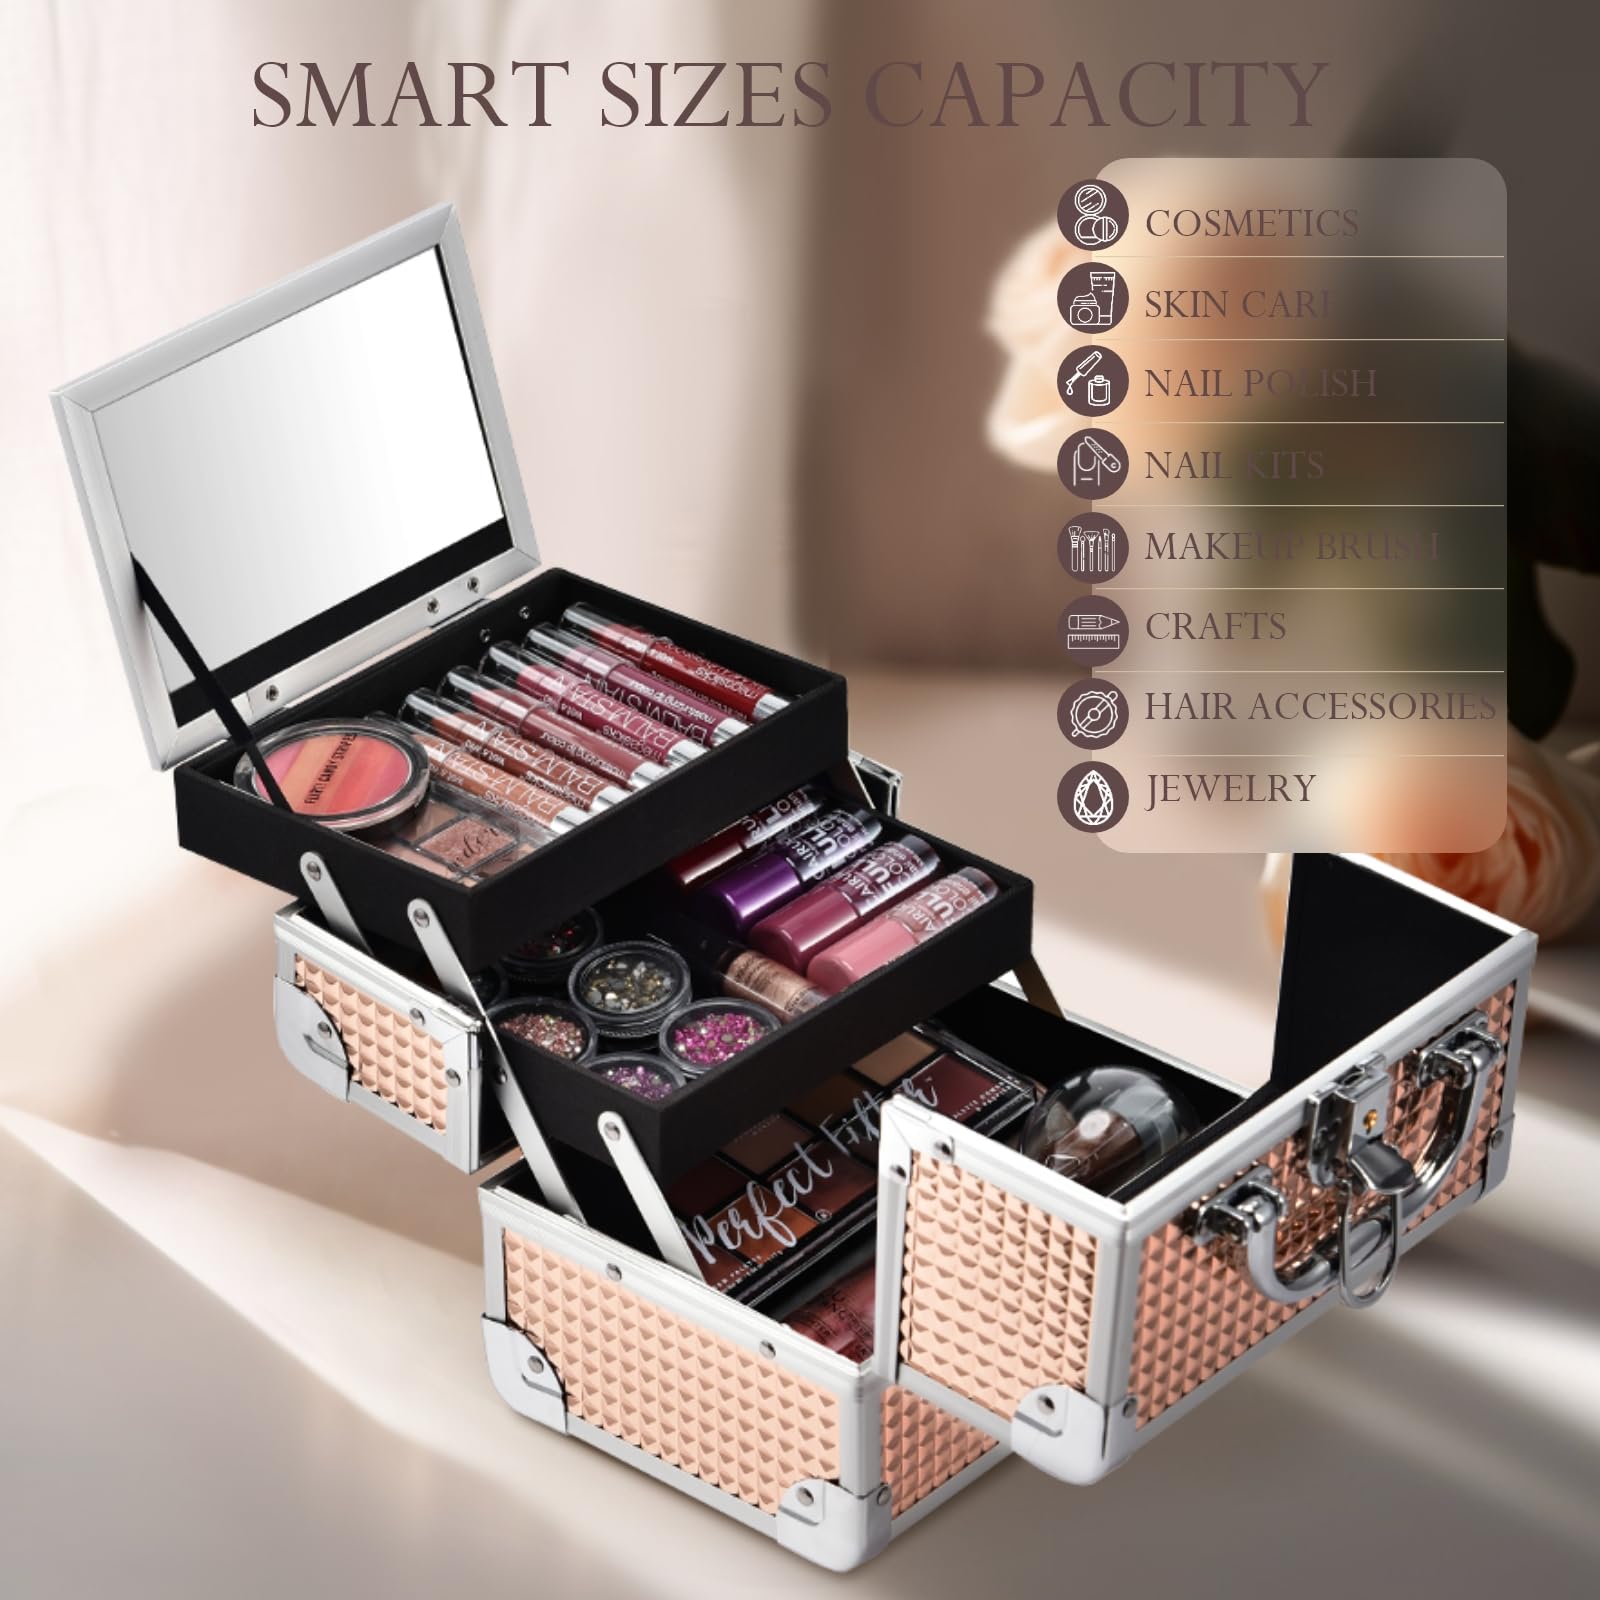 FRENESSA Makeup Train Case Portable Cosmetic Box Jewelry Organizer 2-Tier Trays Lockable with Keys and Mirror Carrying with Handle Makeup Storage Box - Rose Gold